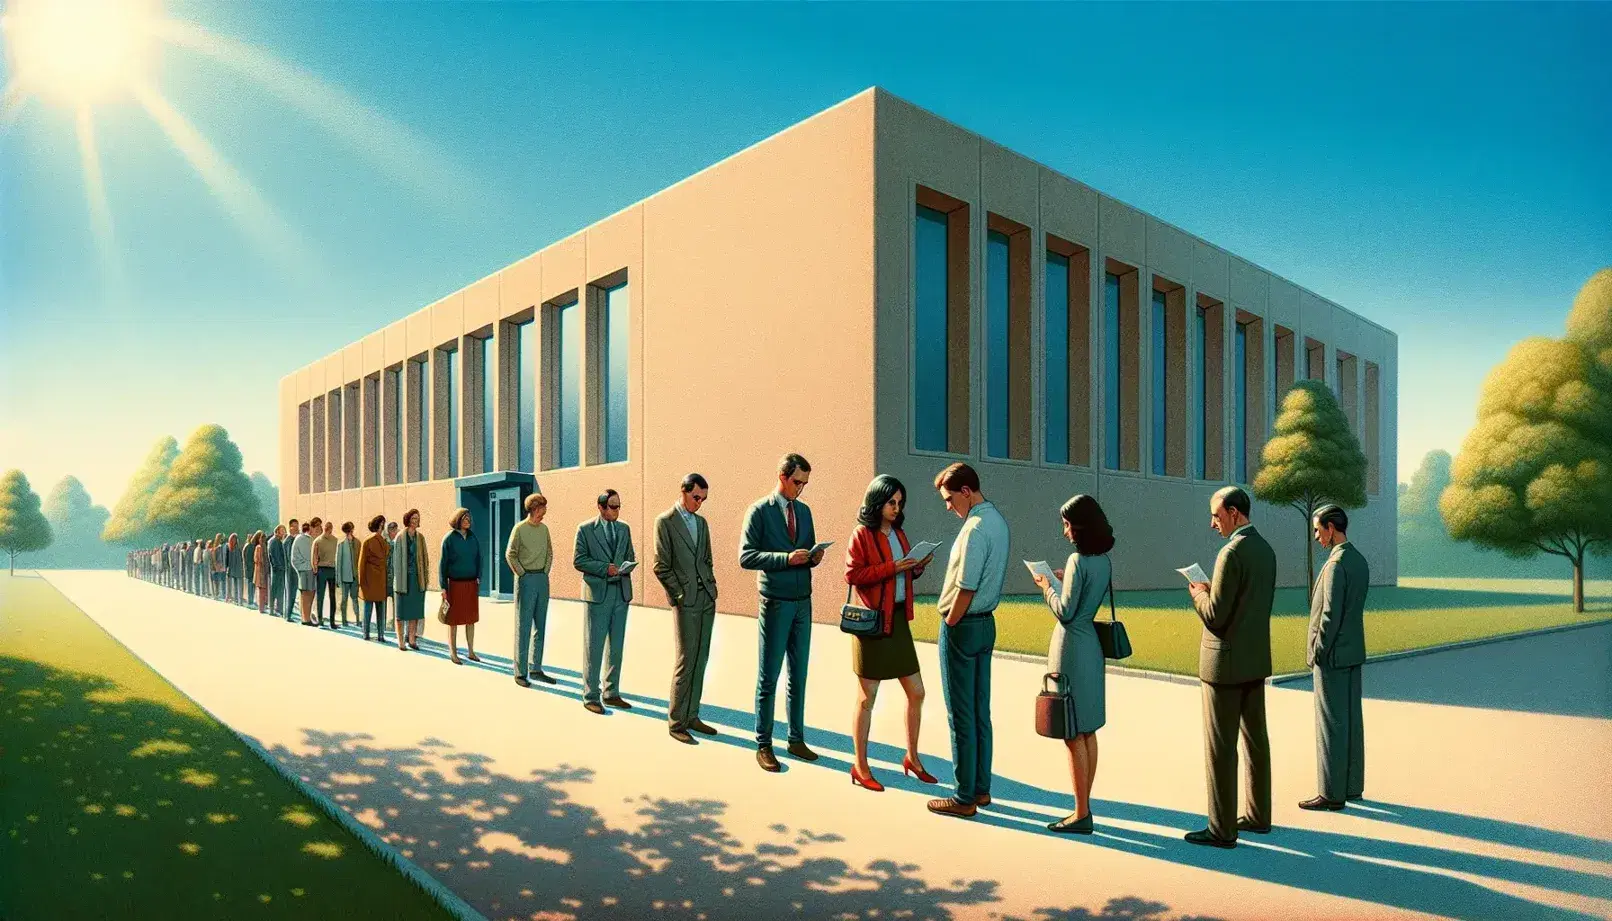 Queue of diverse people waiting outside a plain building on a sunny day, with a clear blue sky and a city skyline in the background.